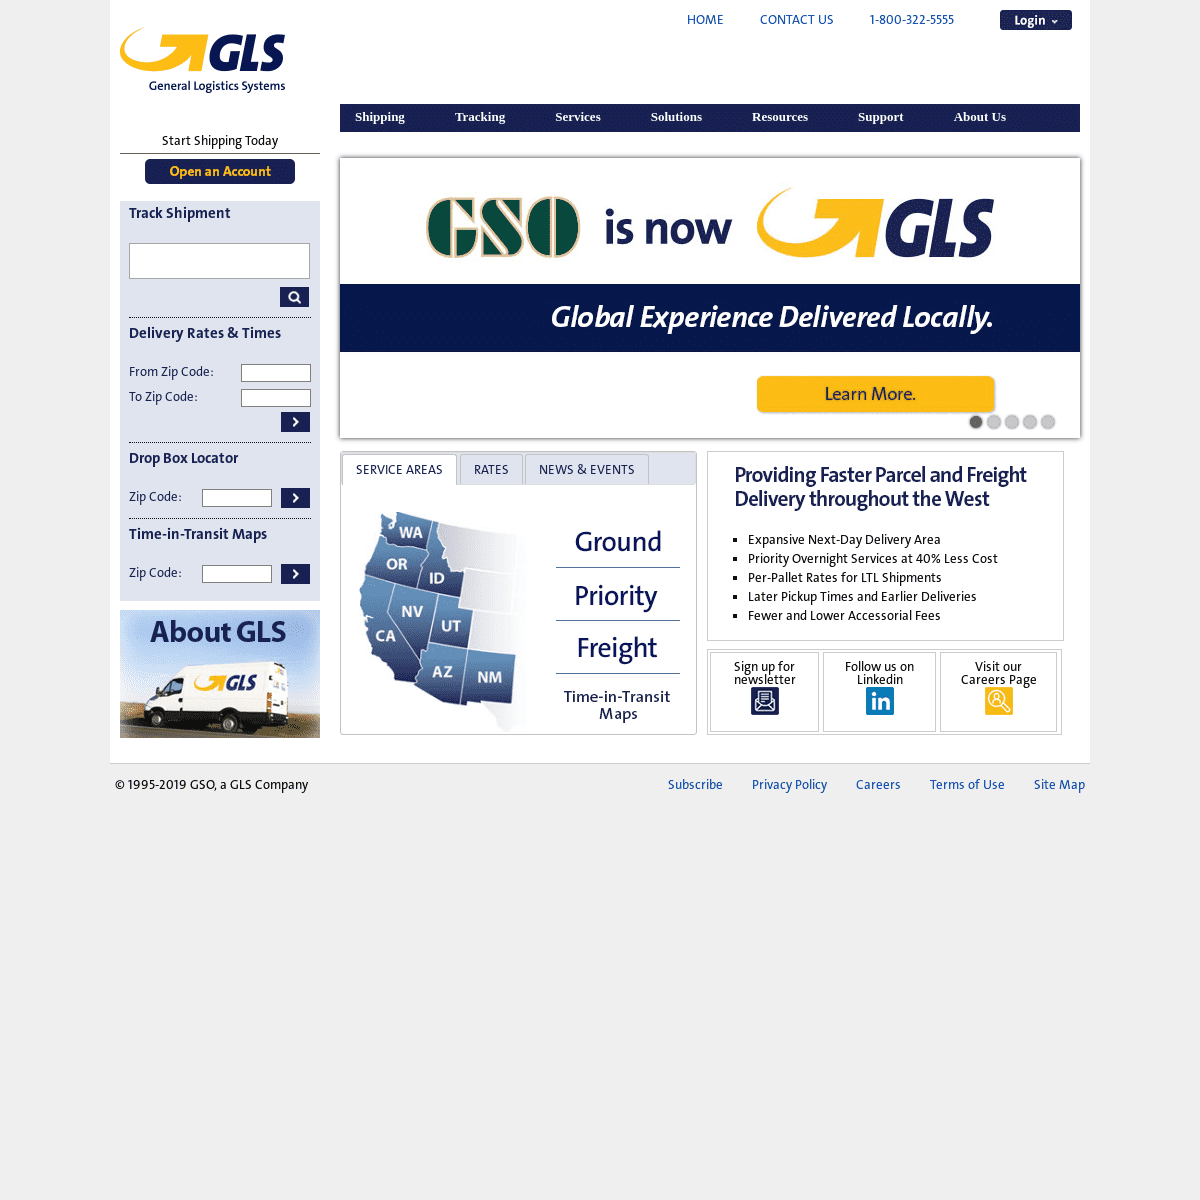 A complete backup of gso.com